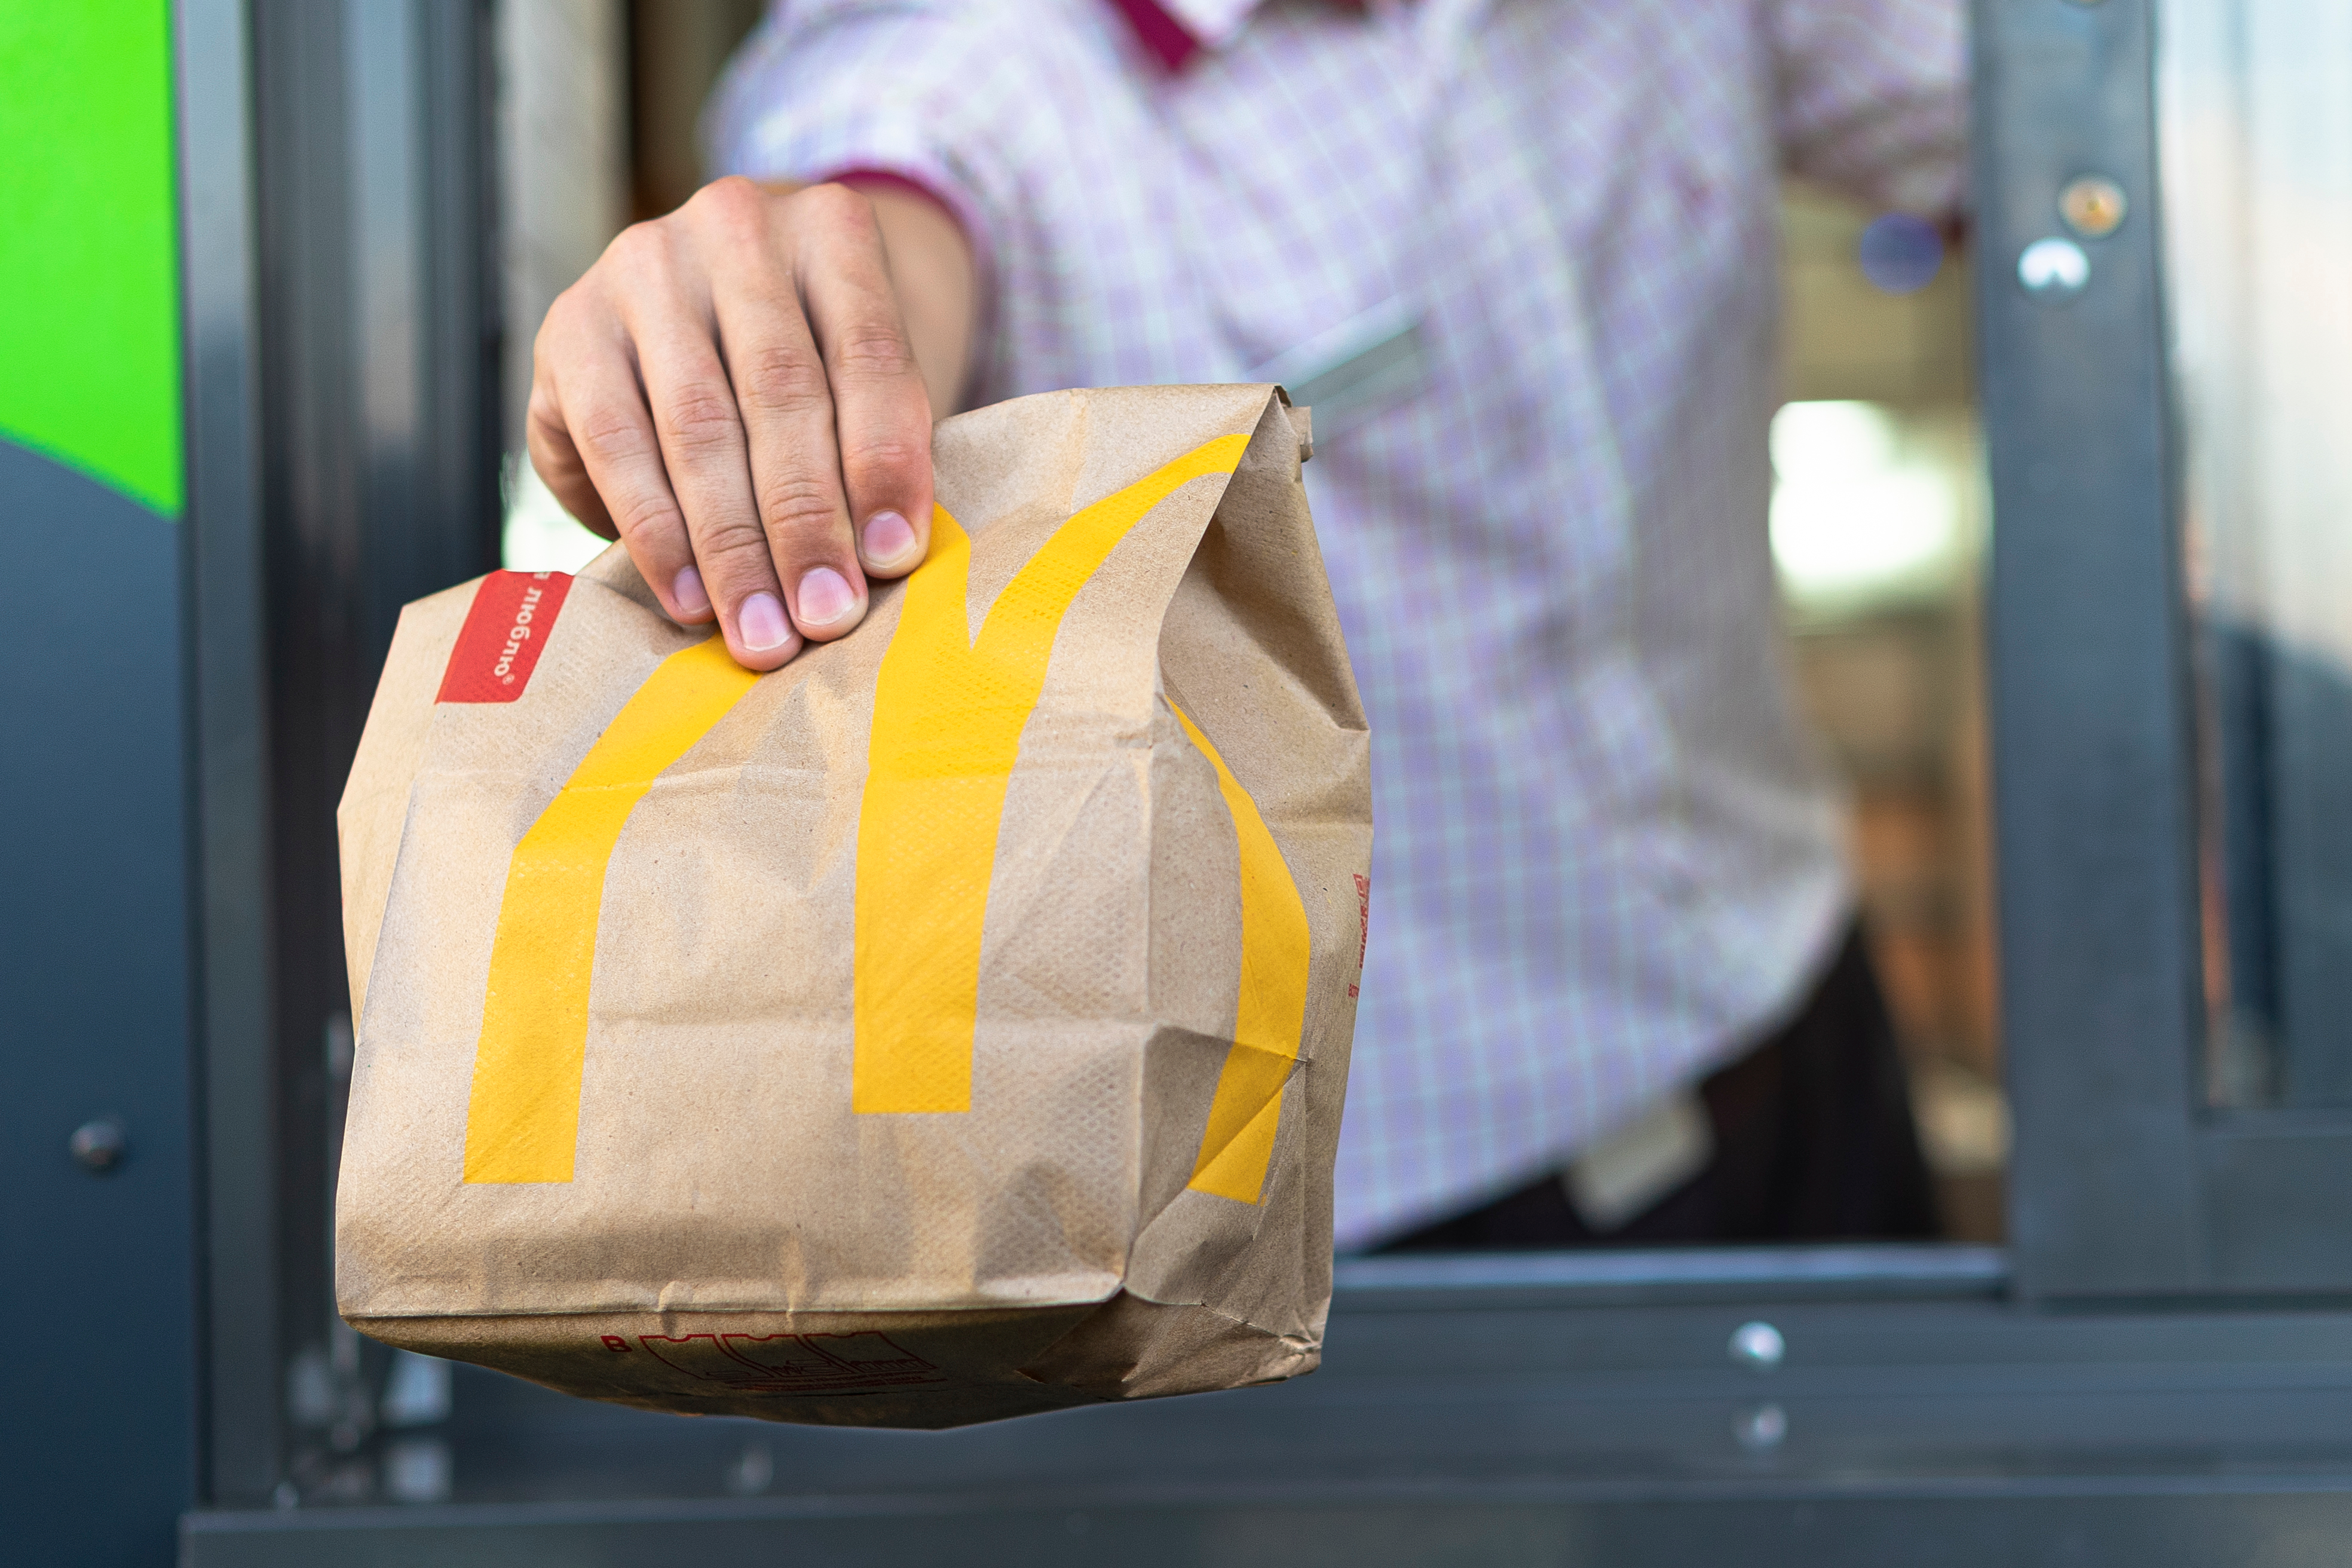 McDonald’s Pays $26 Million in Wage Theft Lawsuit